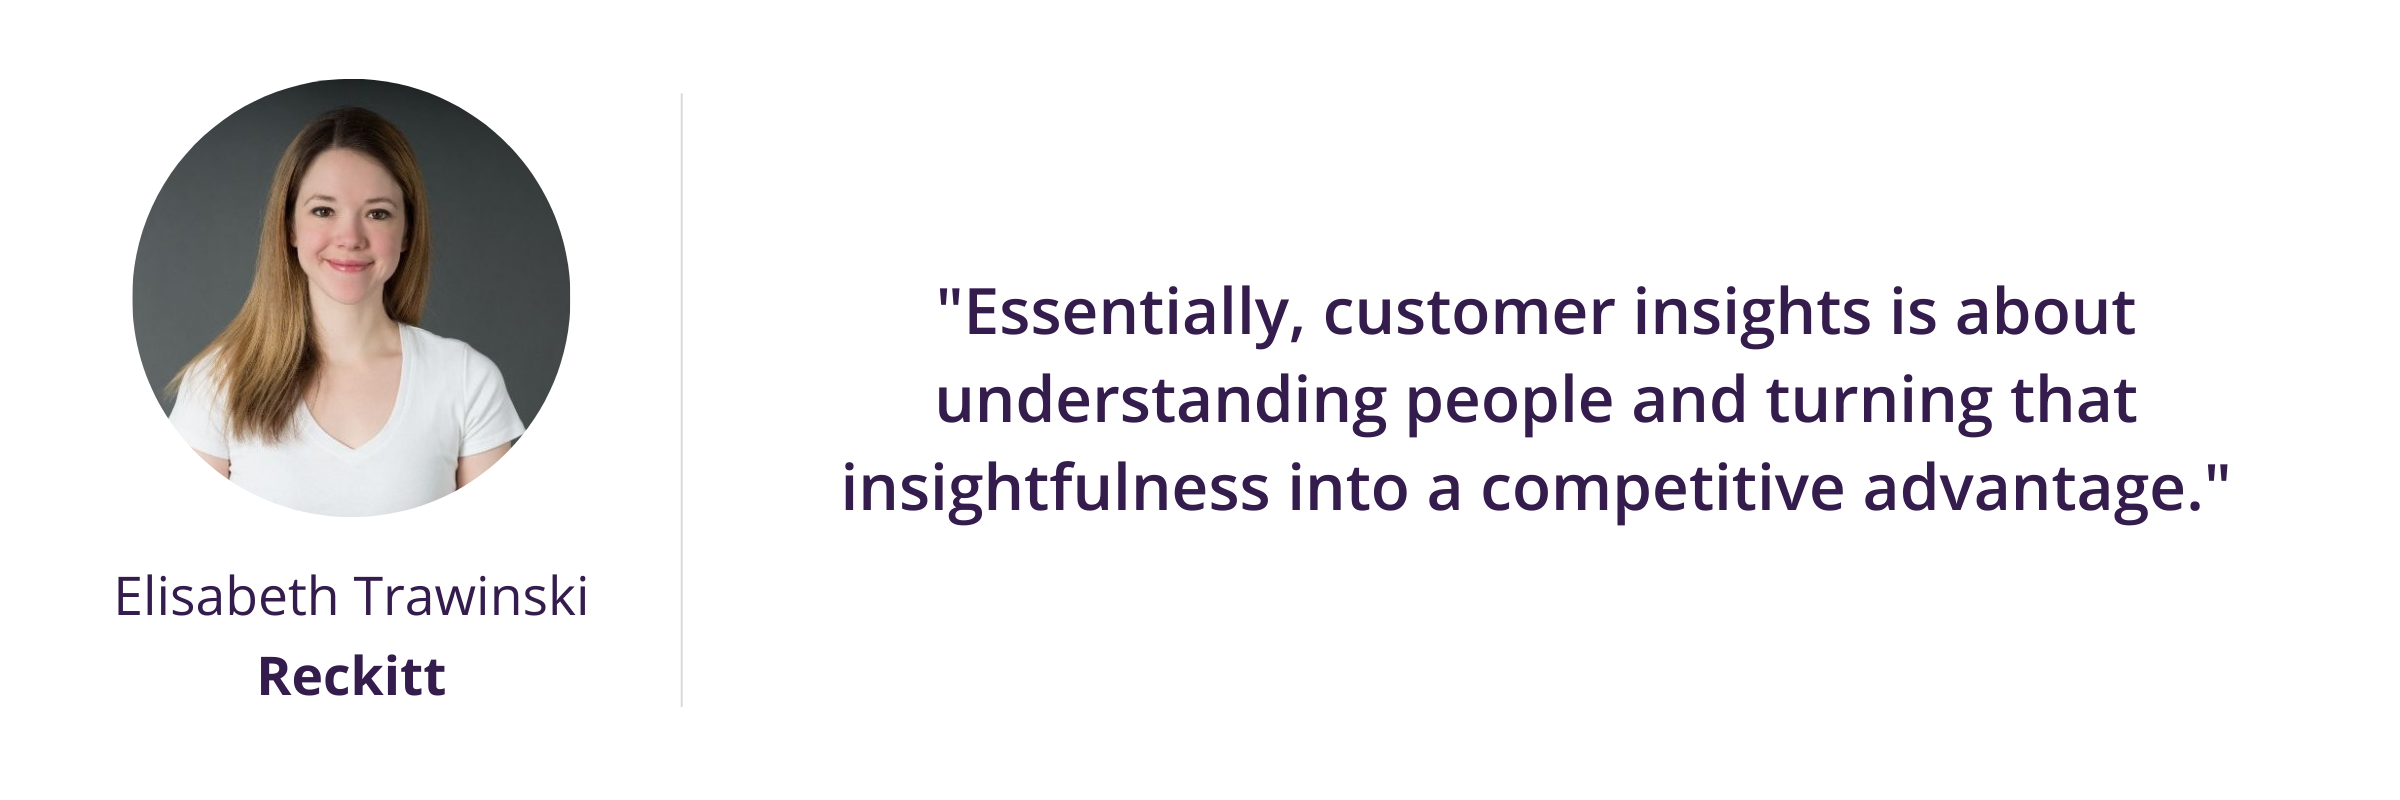 "Essentially, customer insights is about understanding people and turning that insightfulness into a competitive advantage."